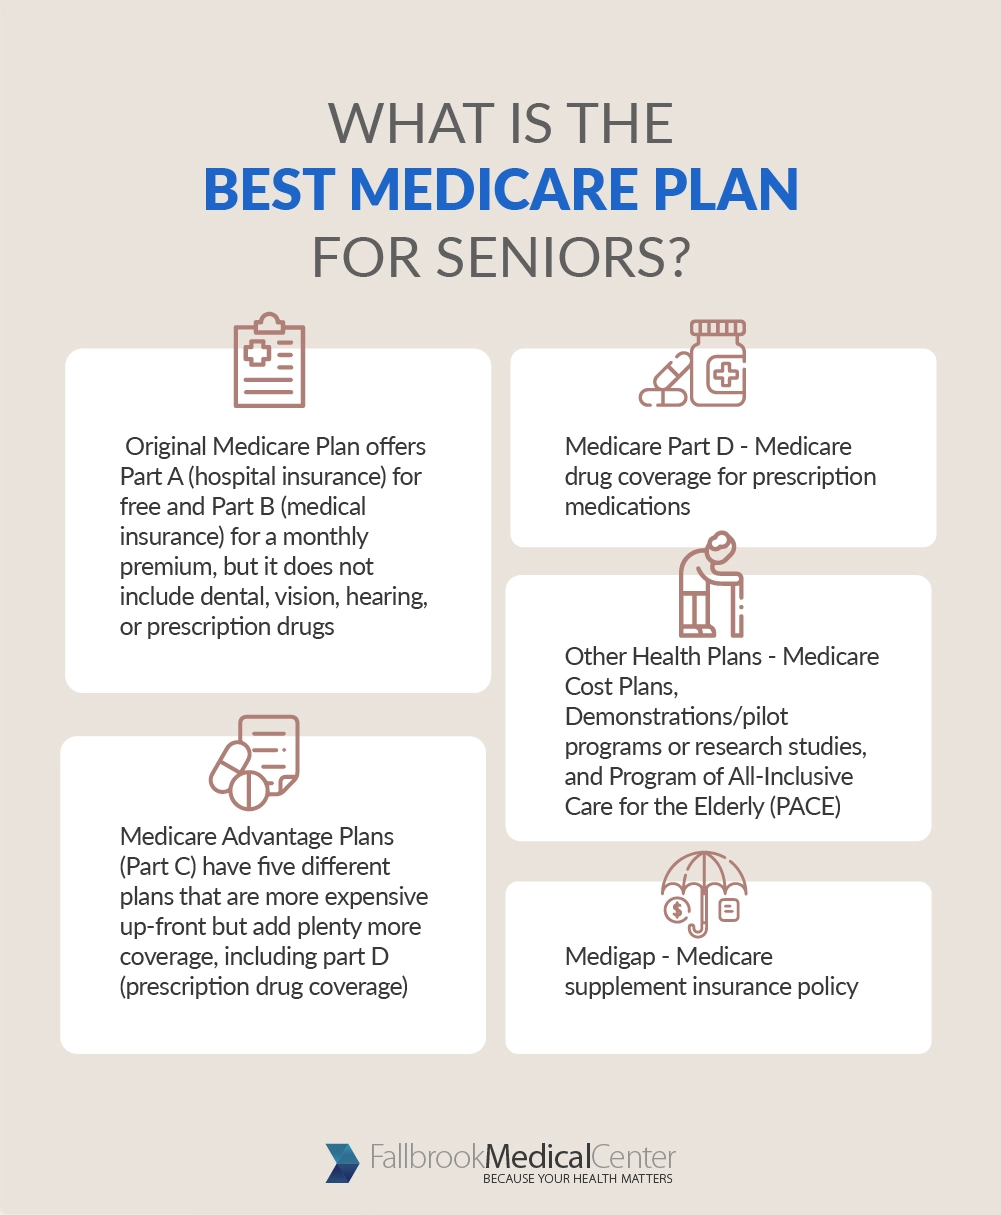 what is the best health insurance for seniors on medicare?